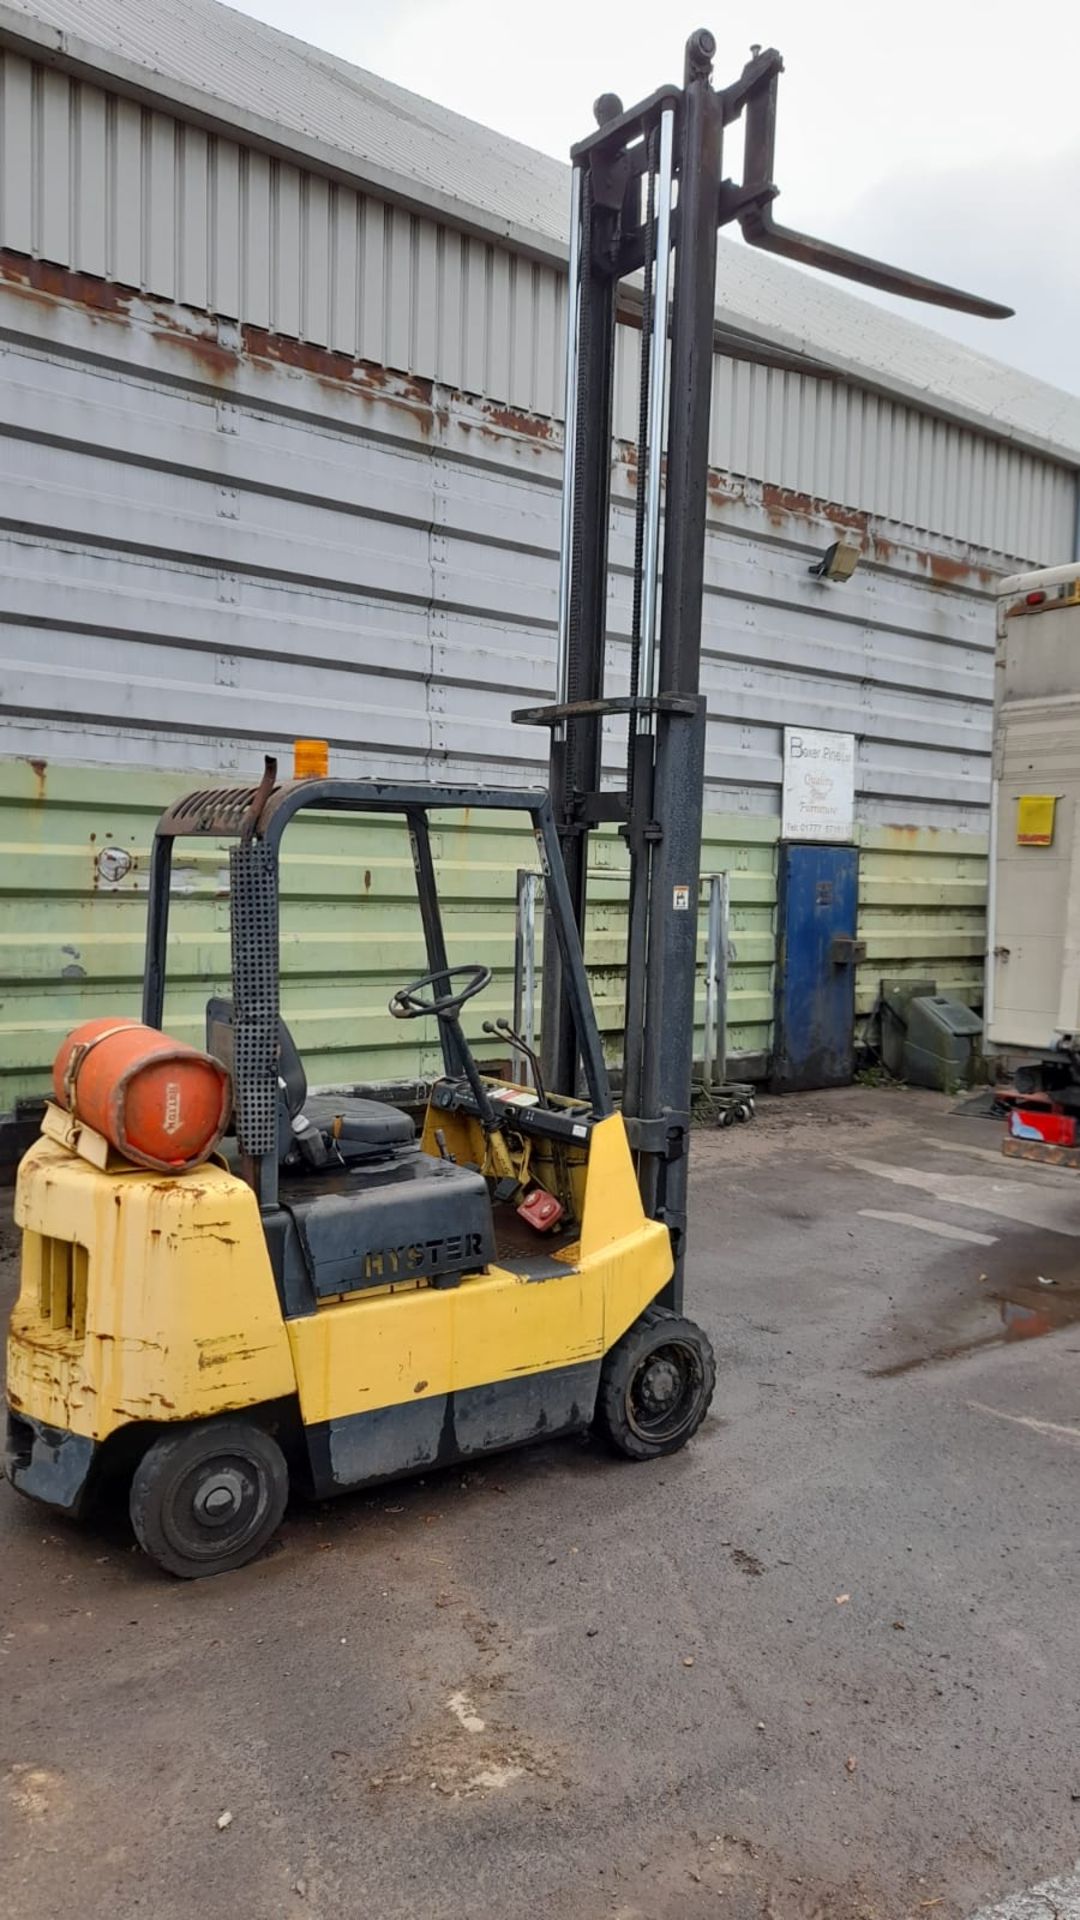 1989 HYSTER S2.00XL 2 TON GAS POWERED FORKLIFT, RUNS DRIVES AND LIFTS *PLUS VAT* - Image 2 of 5